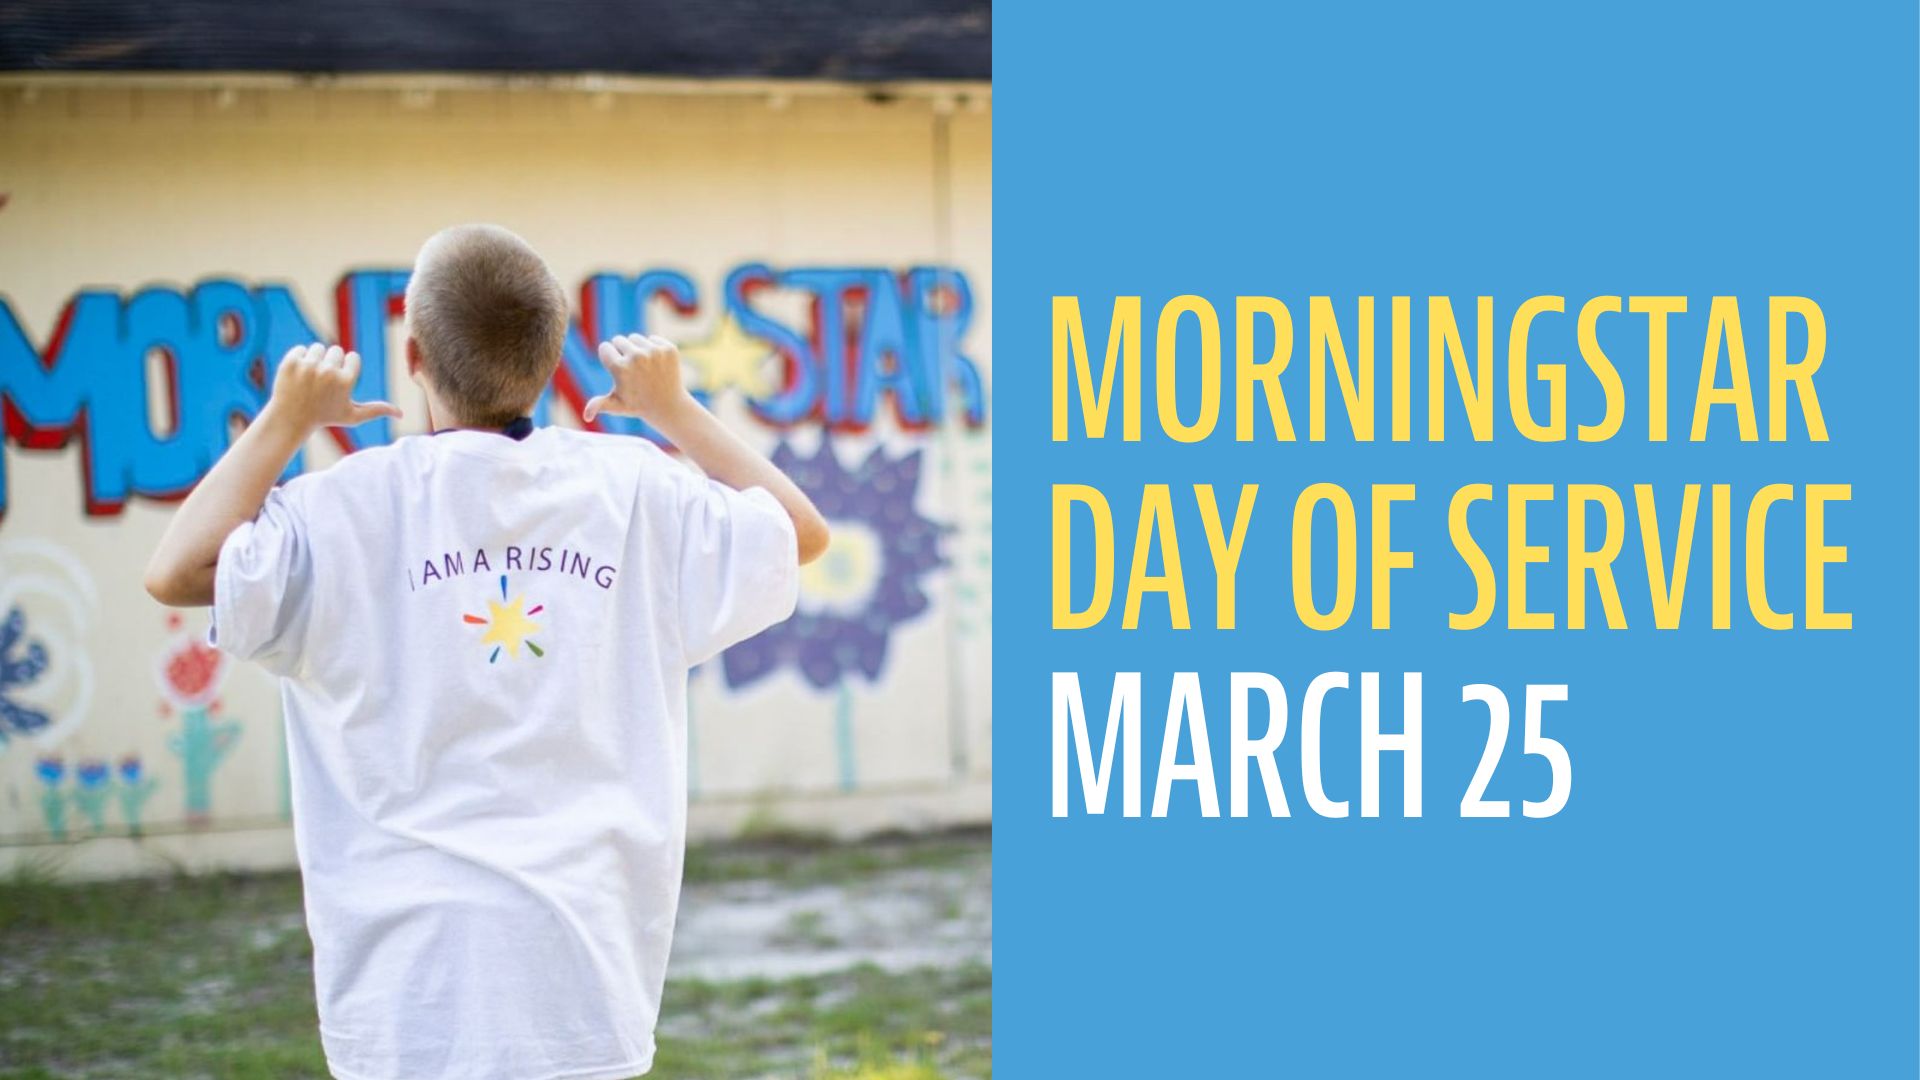 In this photo, a boy has his back to the camera and points to his shirt saying "I am Rising." In the background, a wall is cheerfully painted with the word "Morningstar."